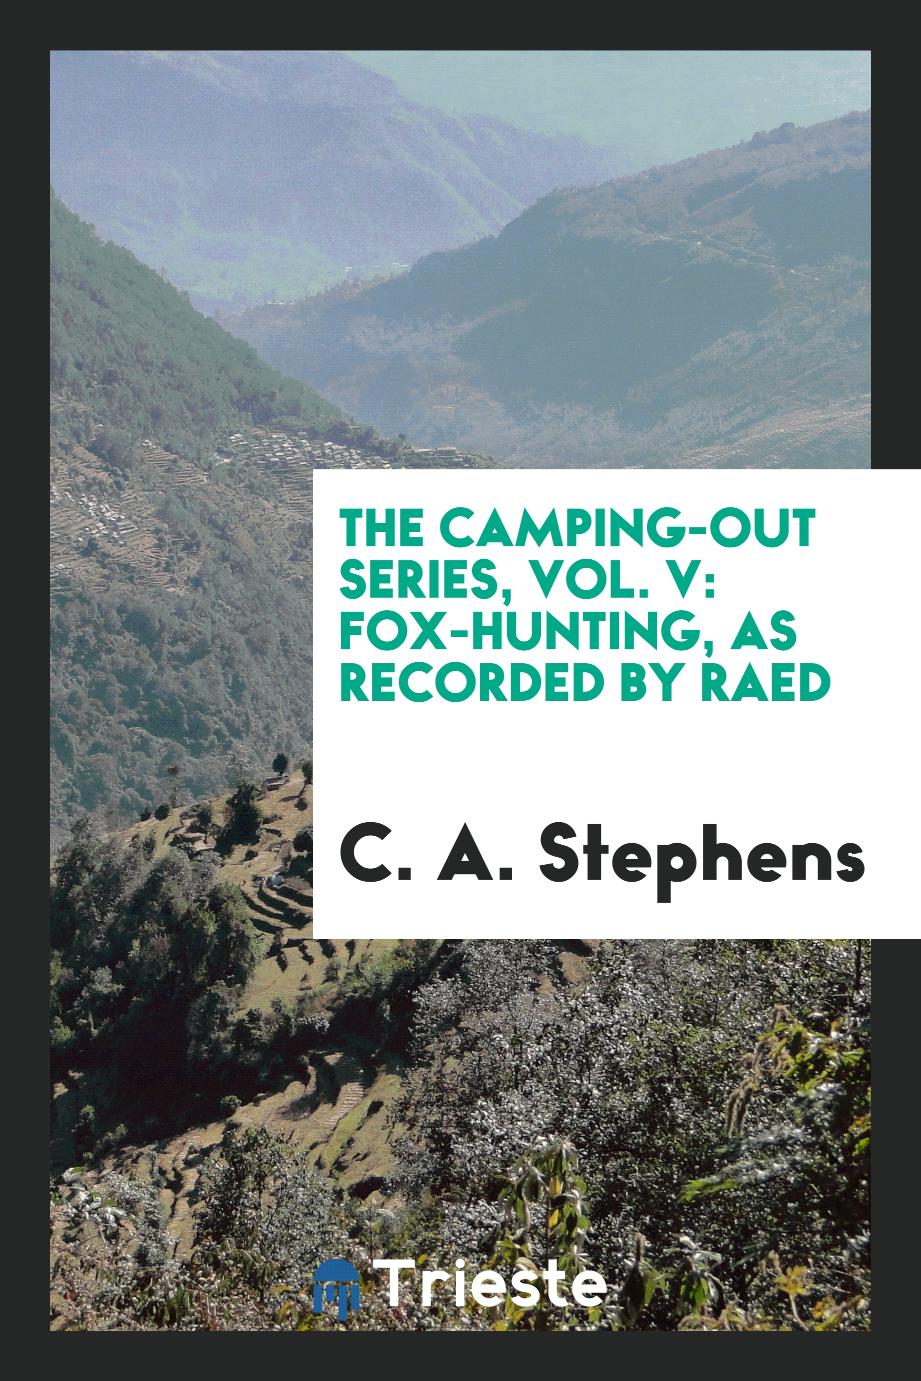 The camping-out series, Vol. V: Fox-hunting, as recorded by Raed